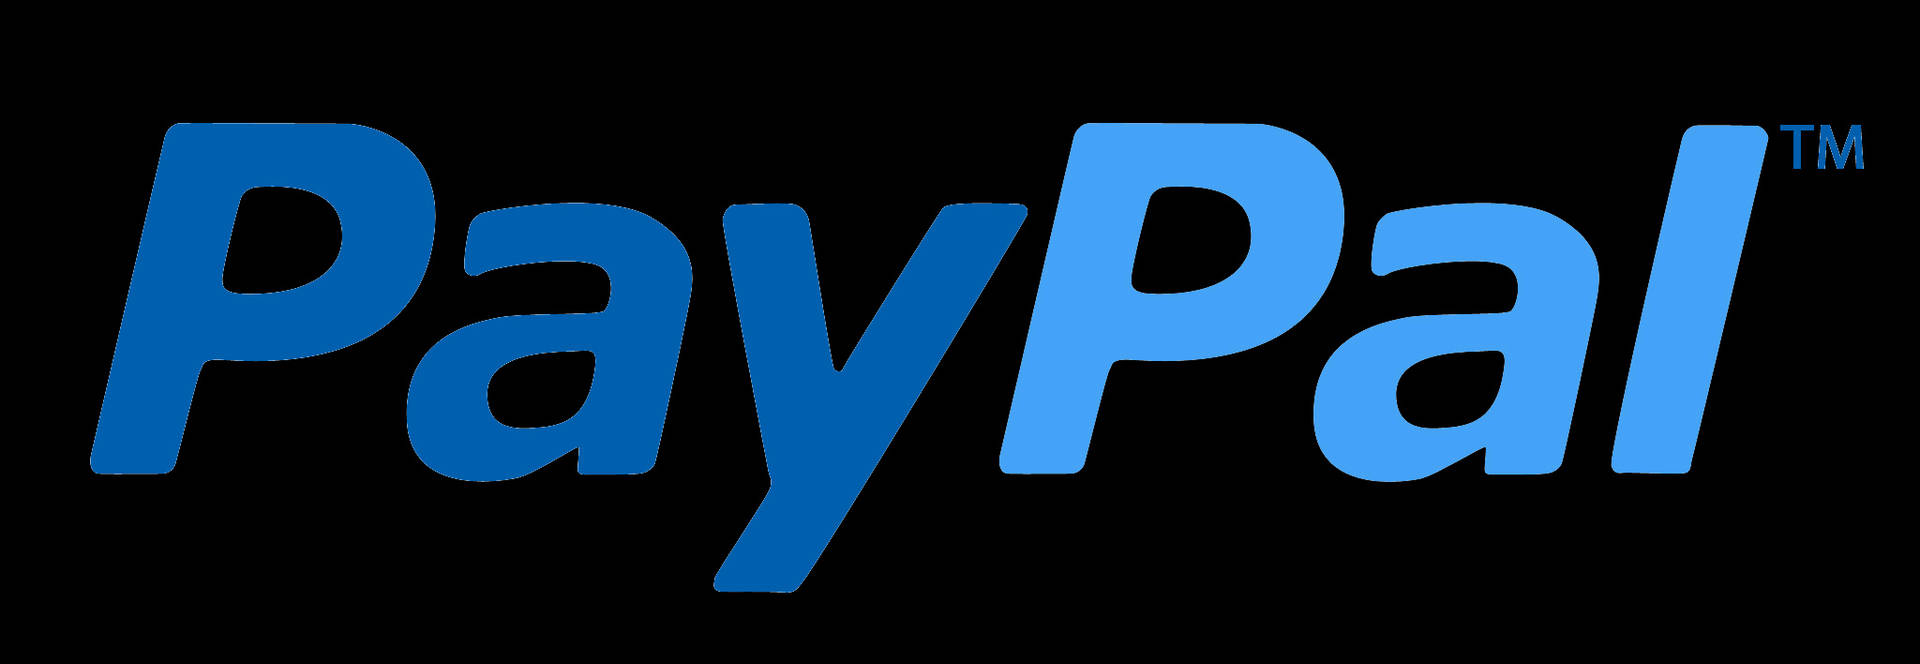 Paypal Name In Black Background